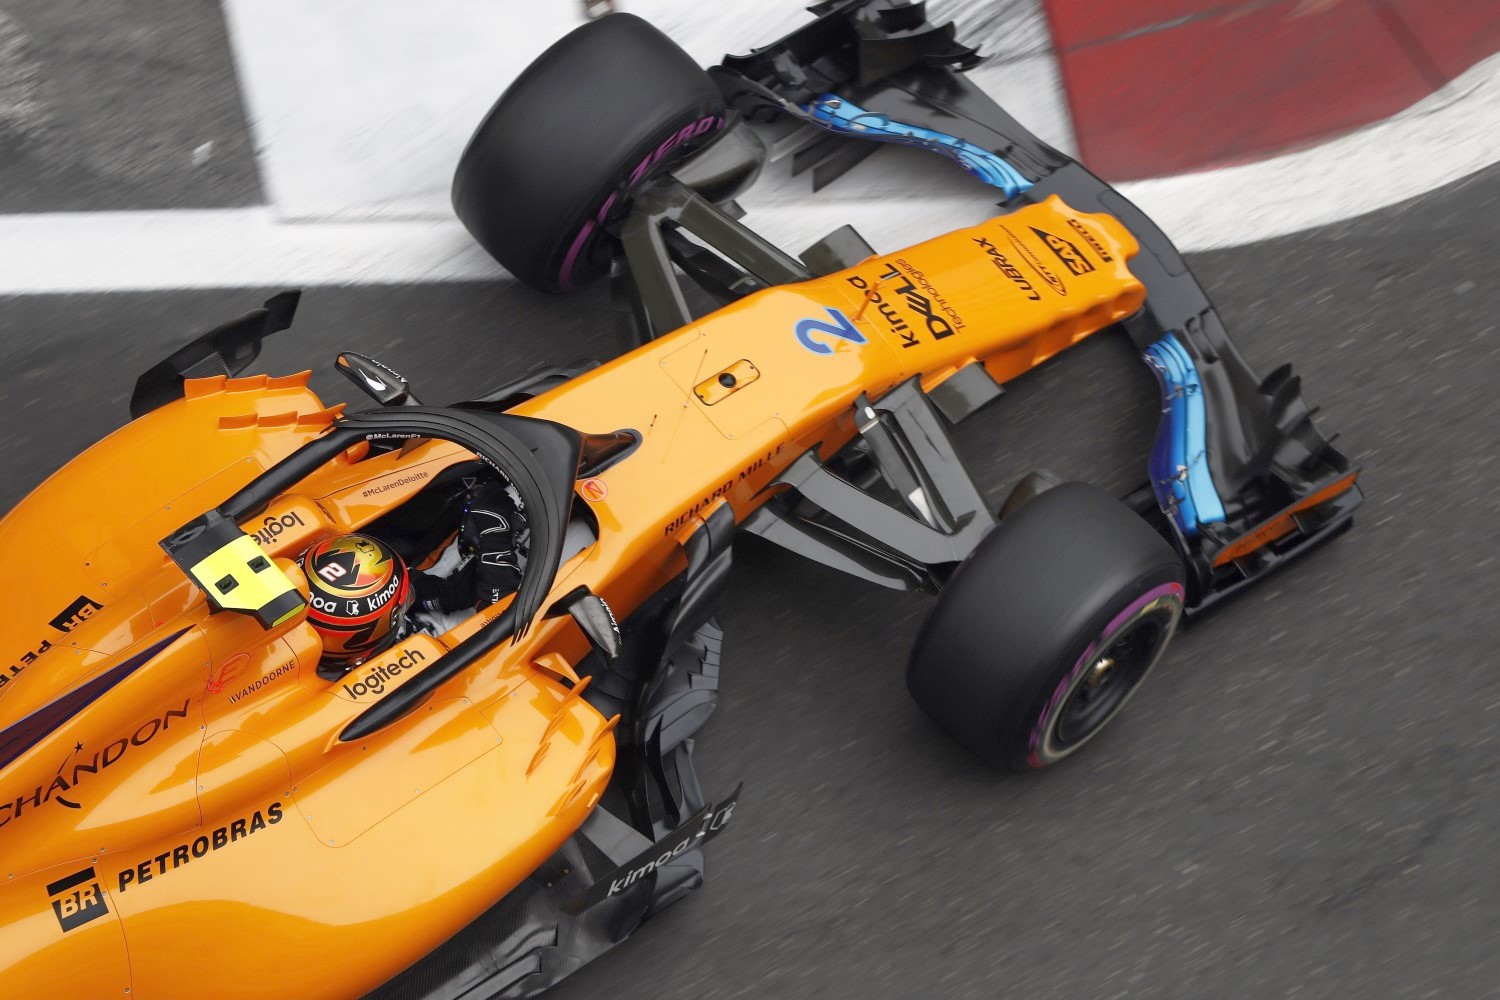 All the teams will bring new aero bits to Barcelona says Boullier